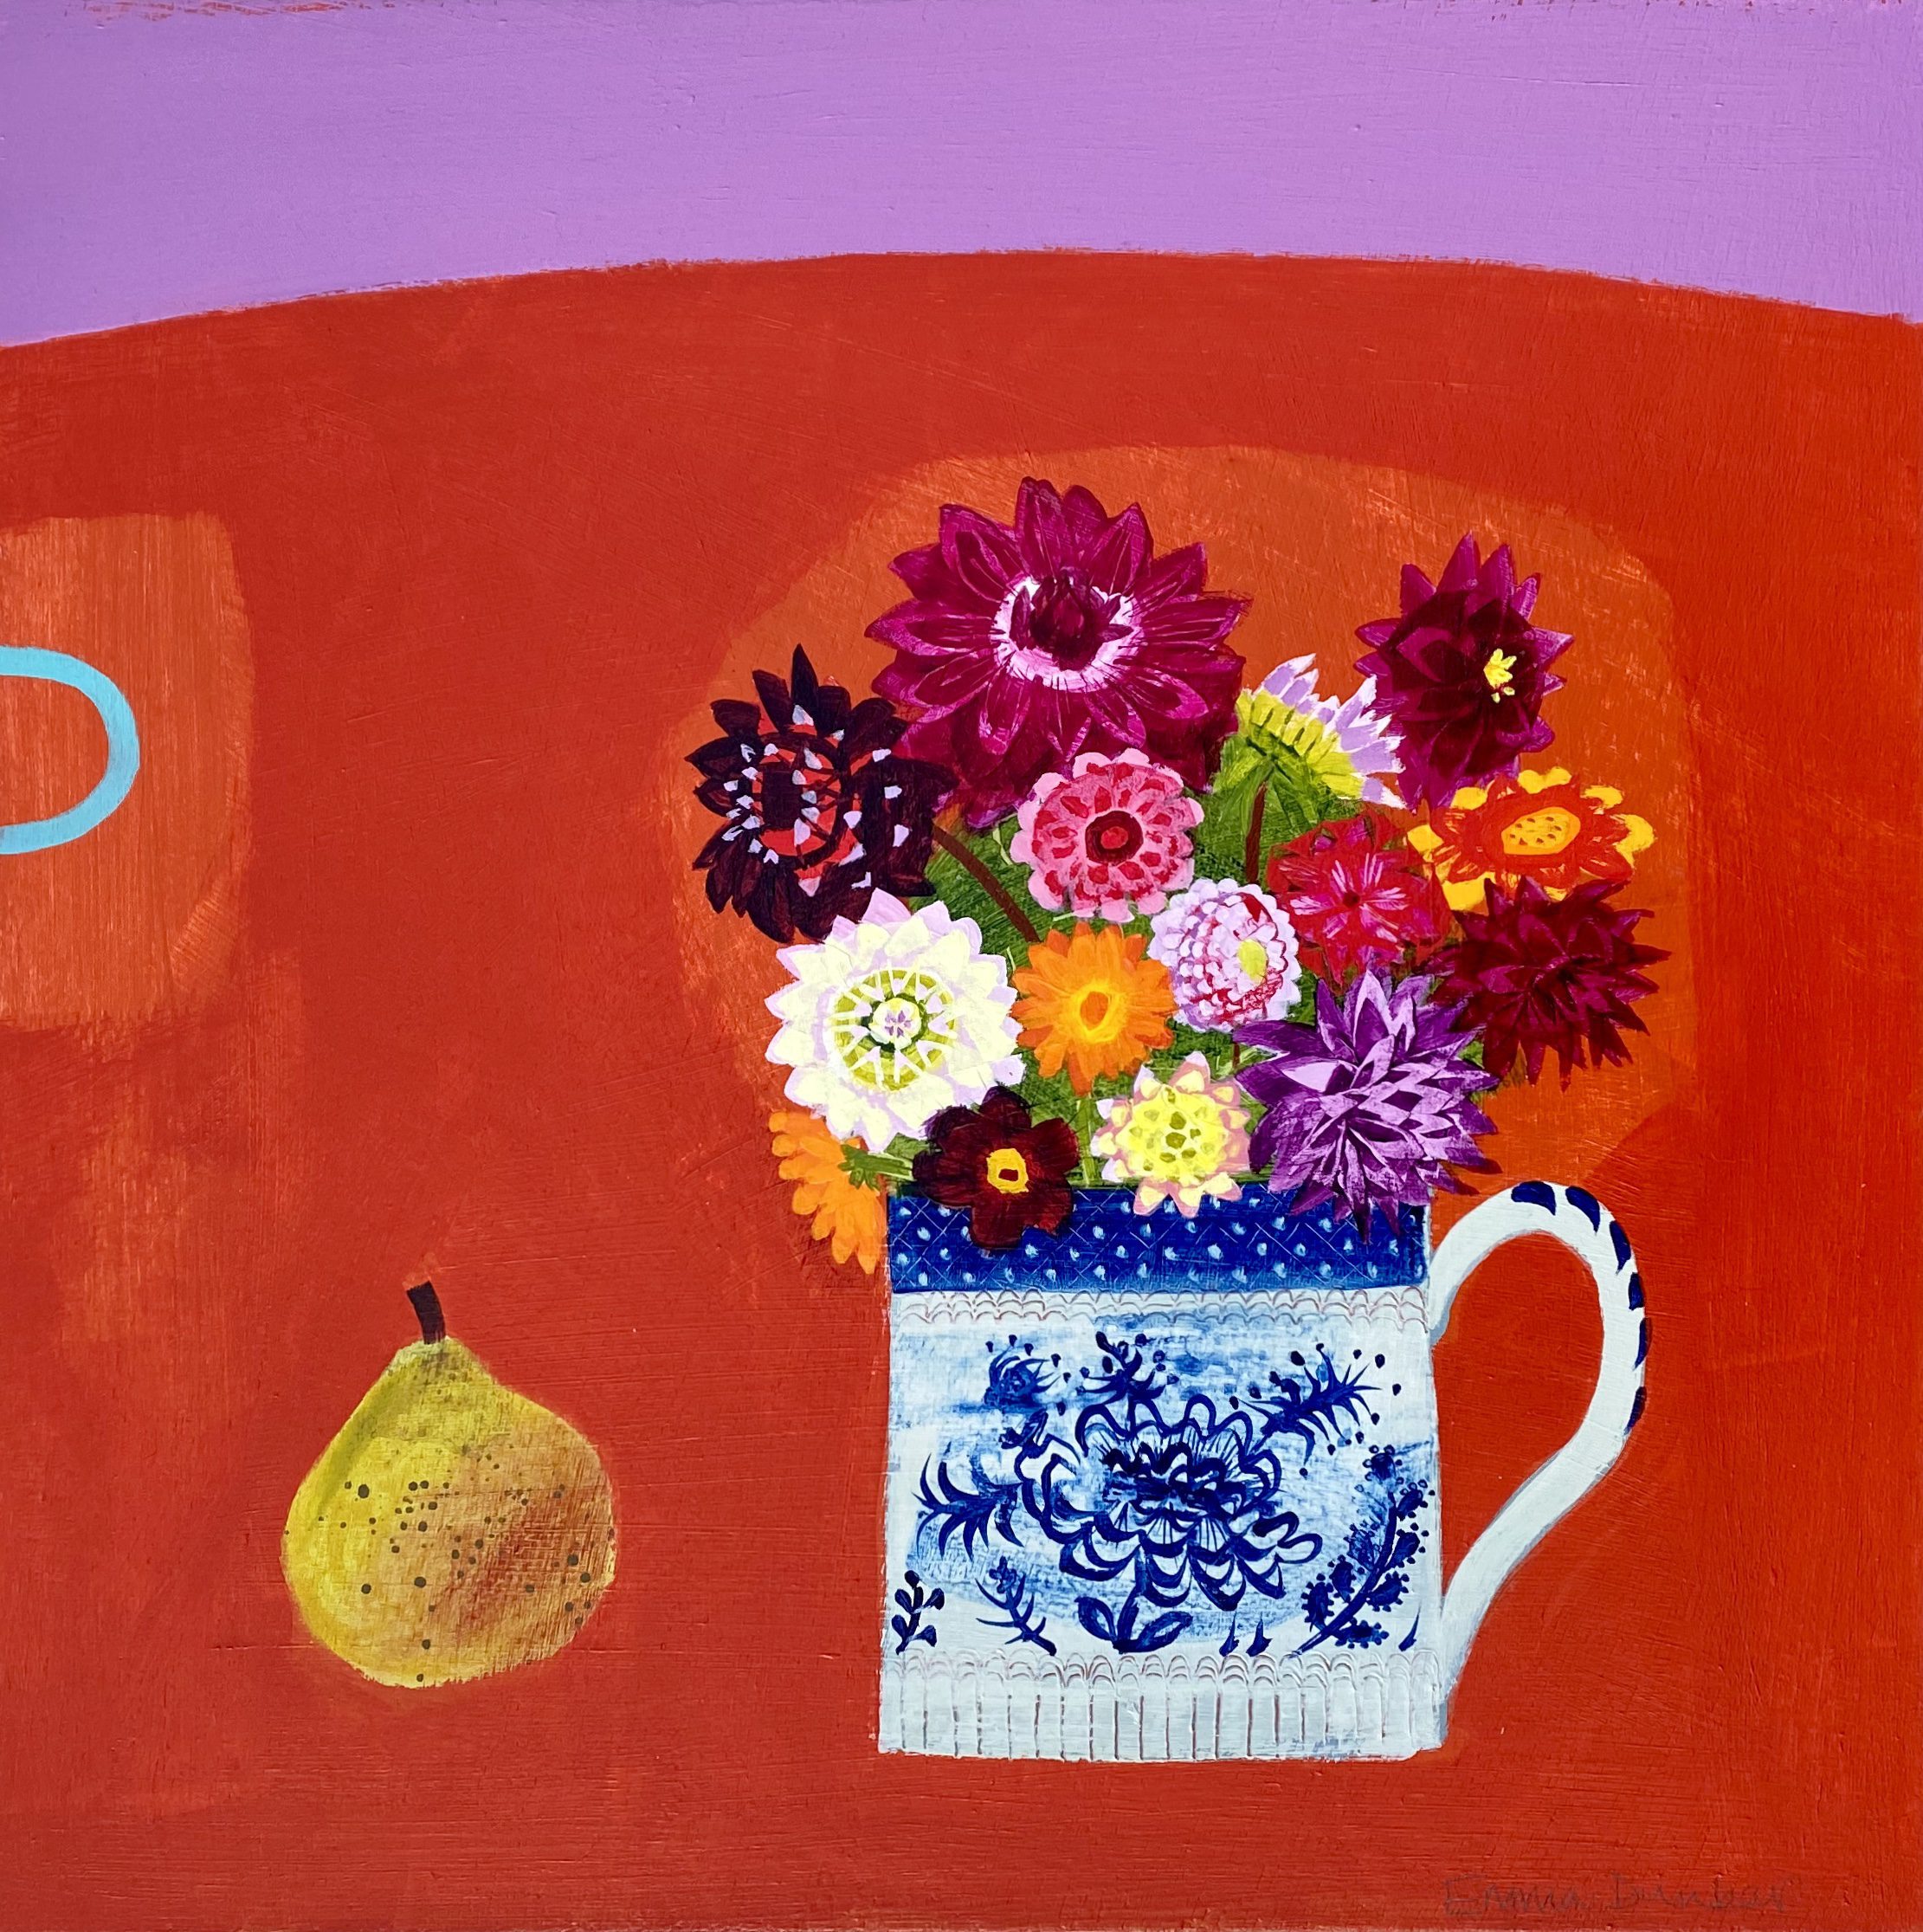 Dahlias and a pear on orange in the special cup